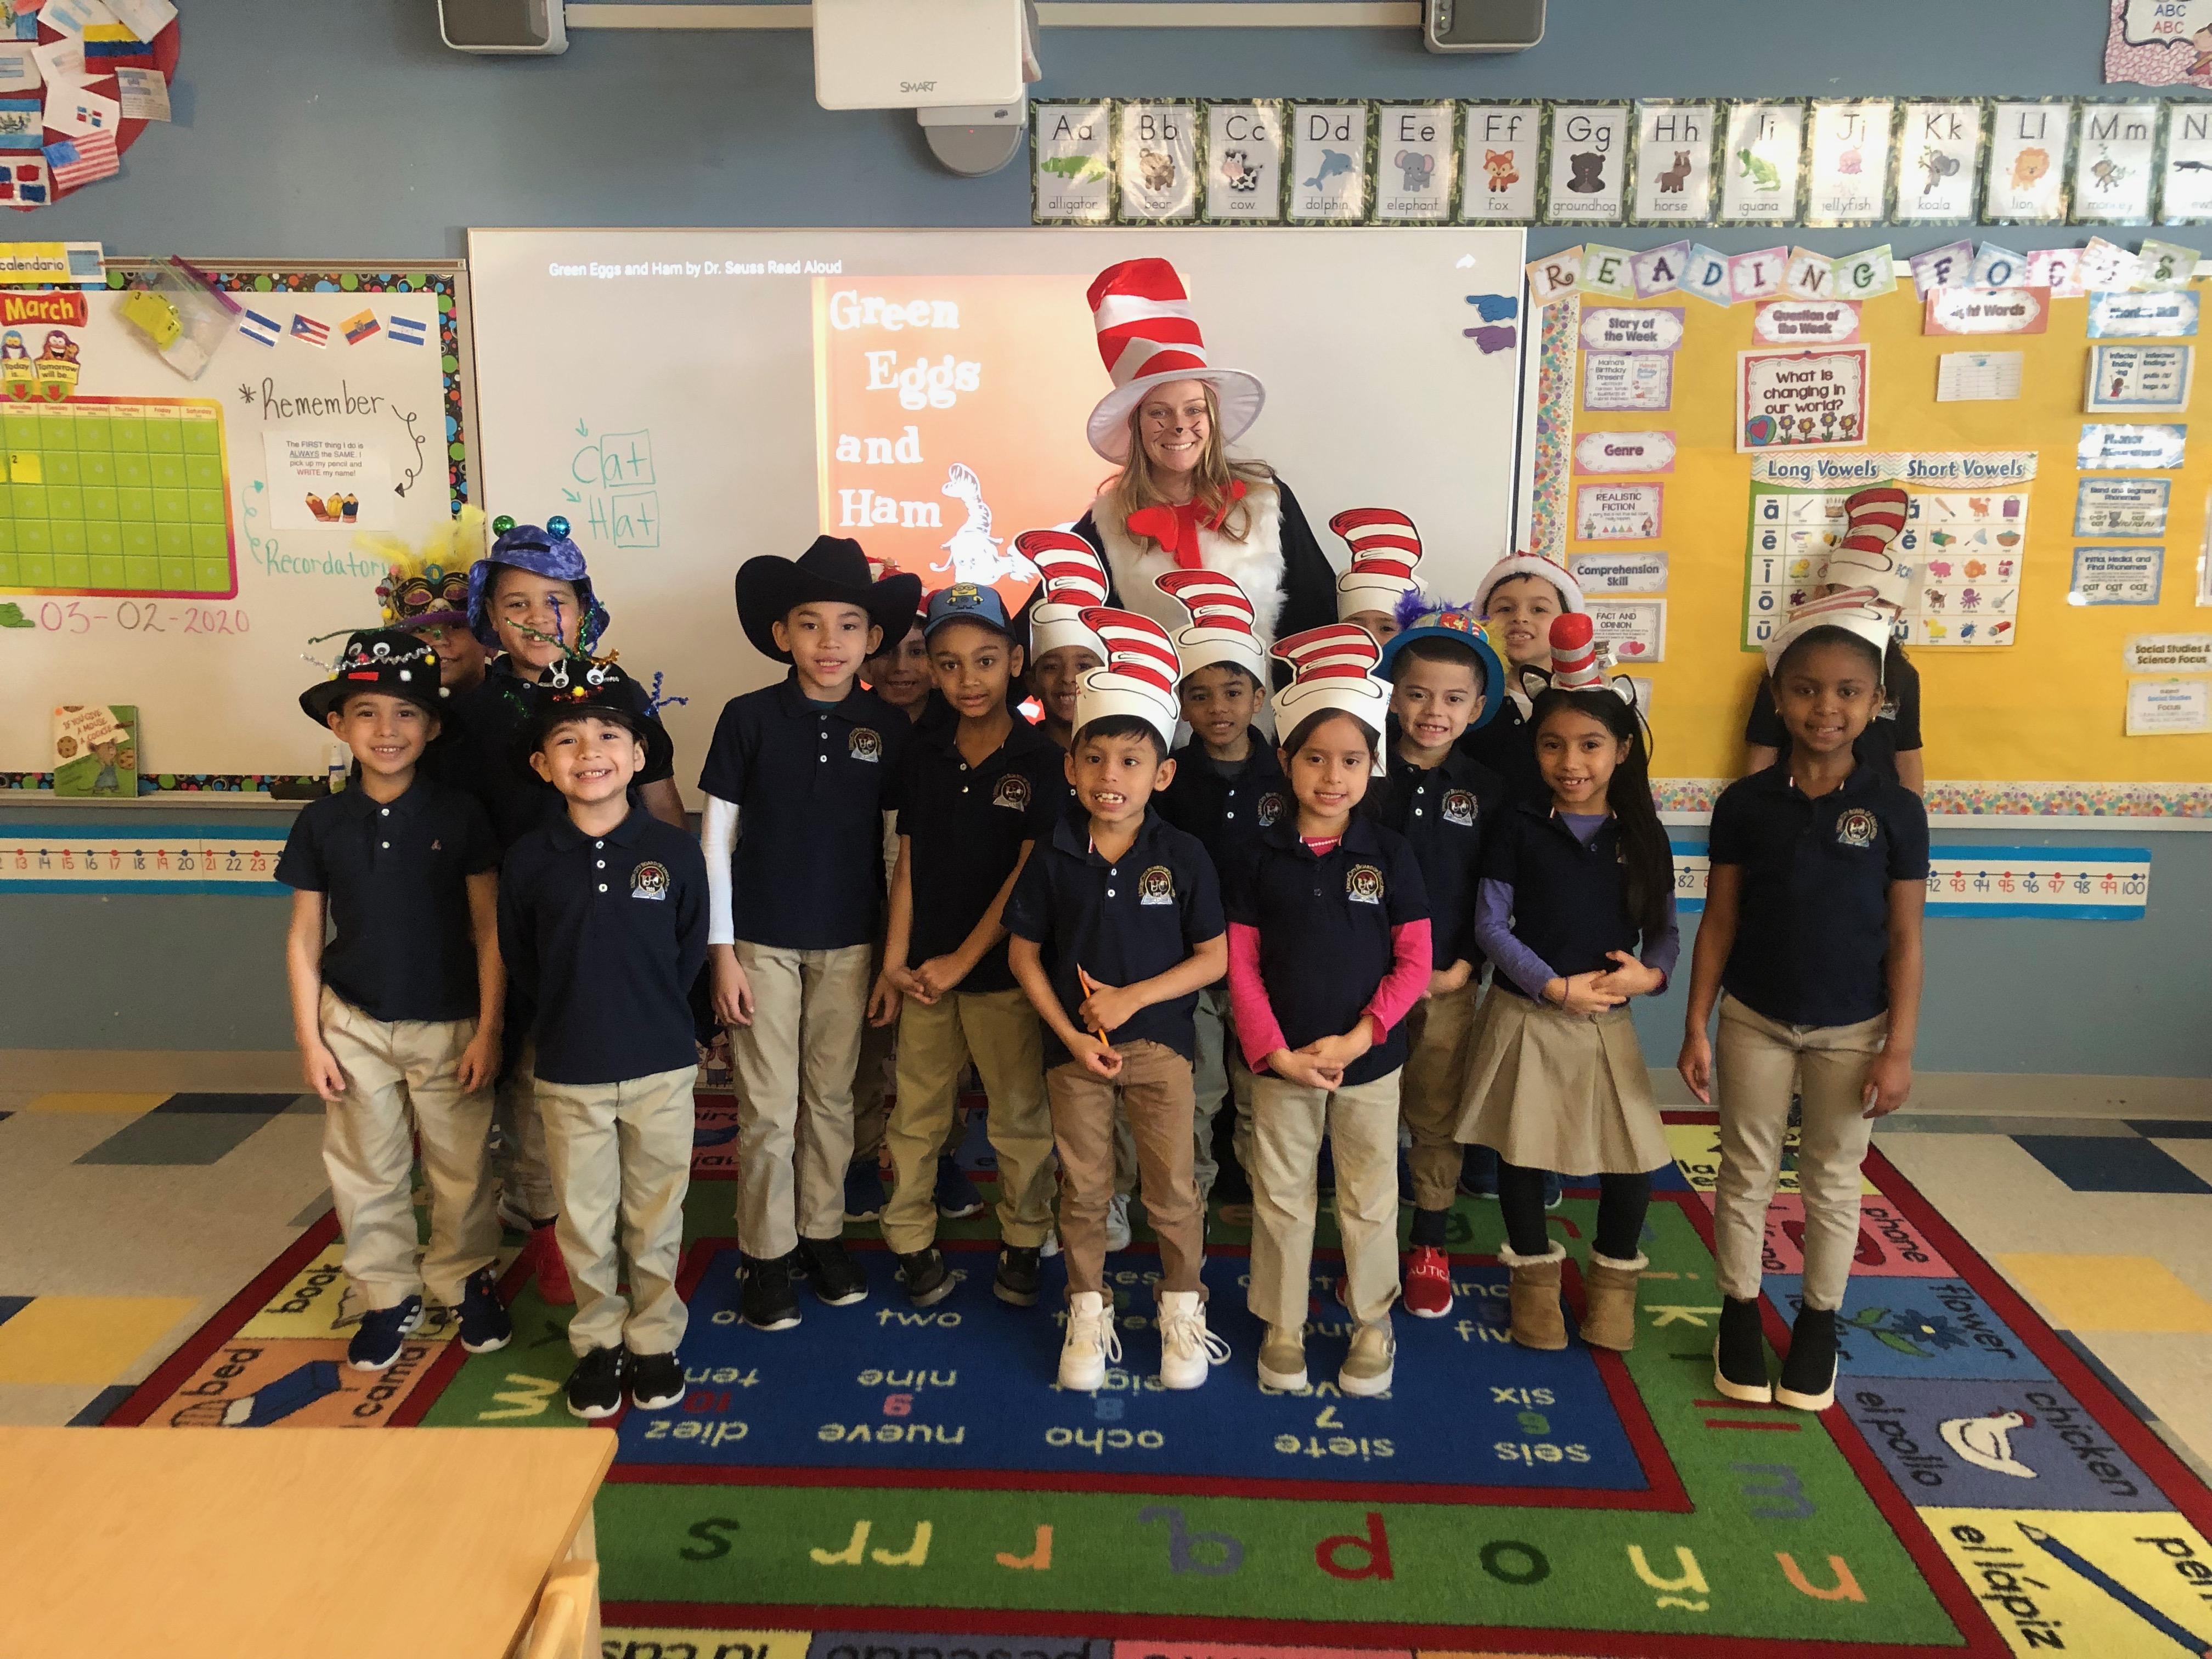 kindergarten teacher dressed as the Cat in the hat with her students wearing wacky hats